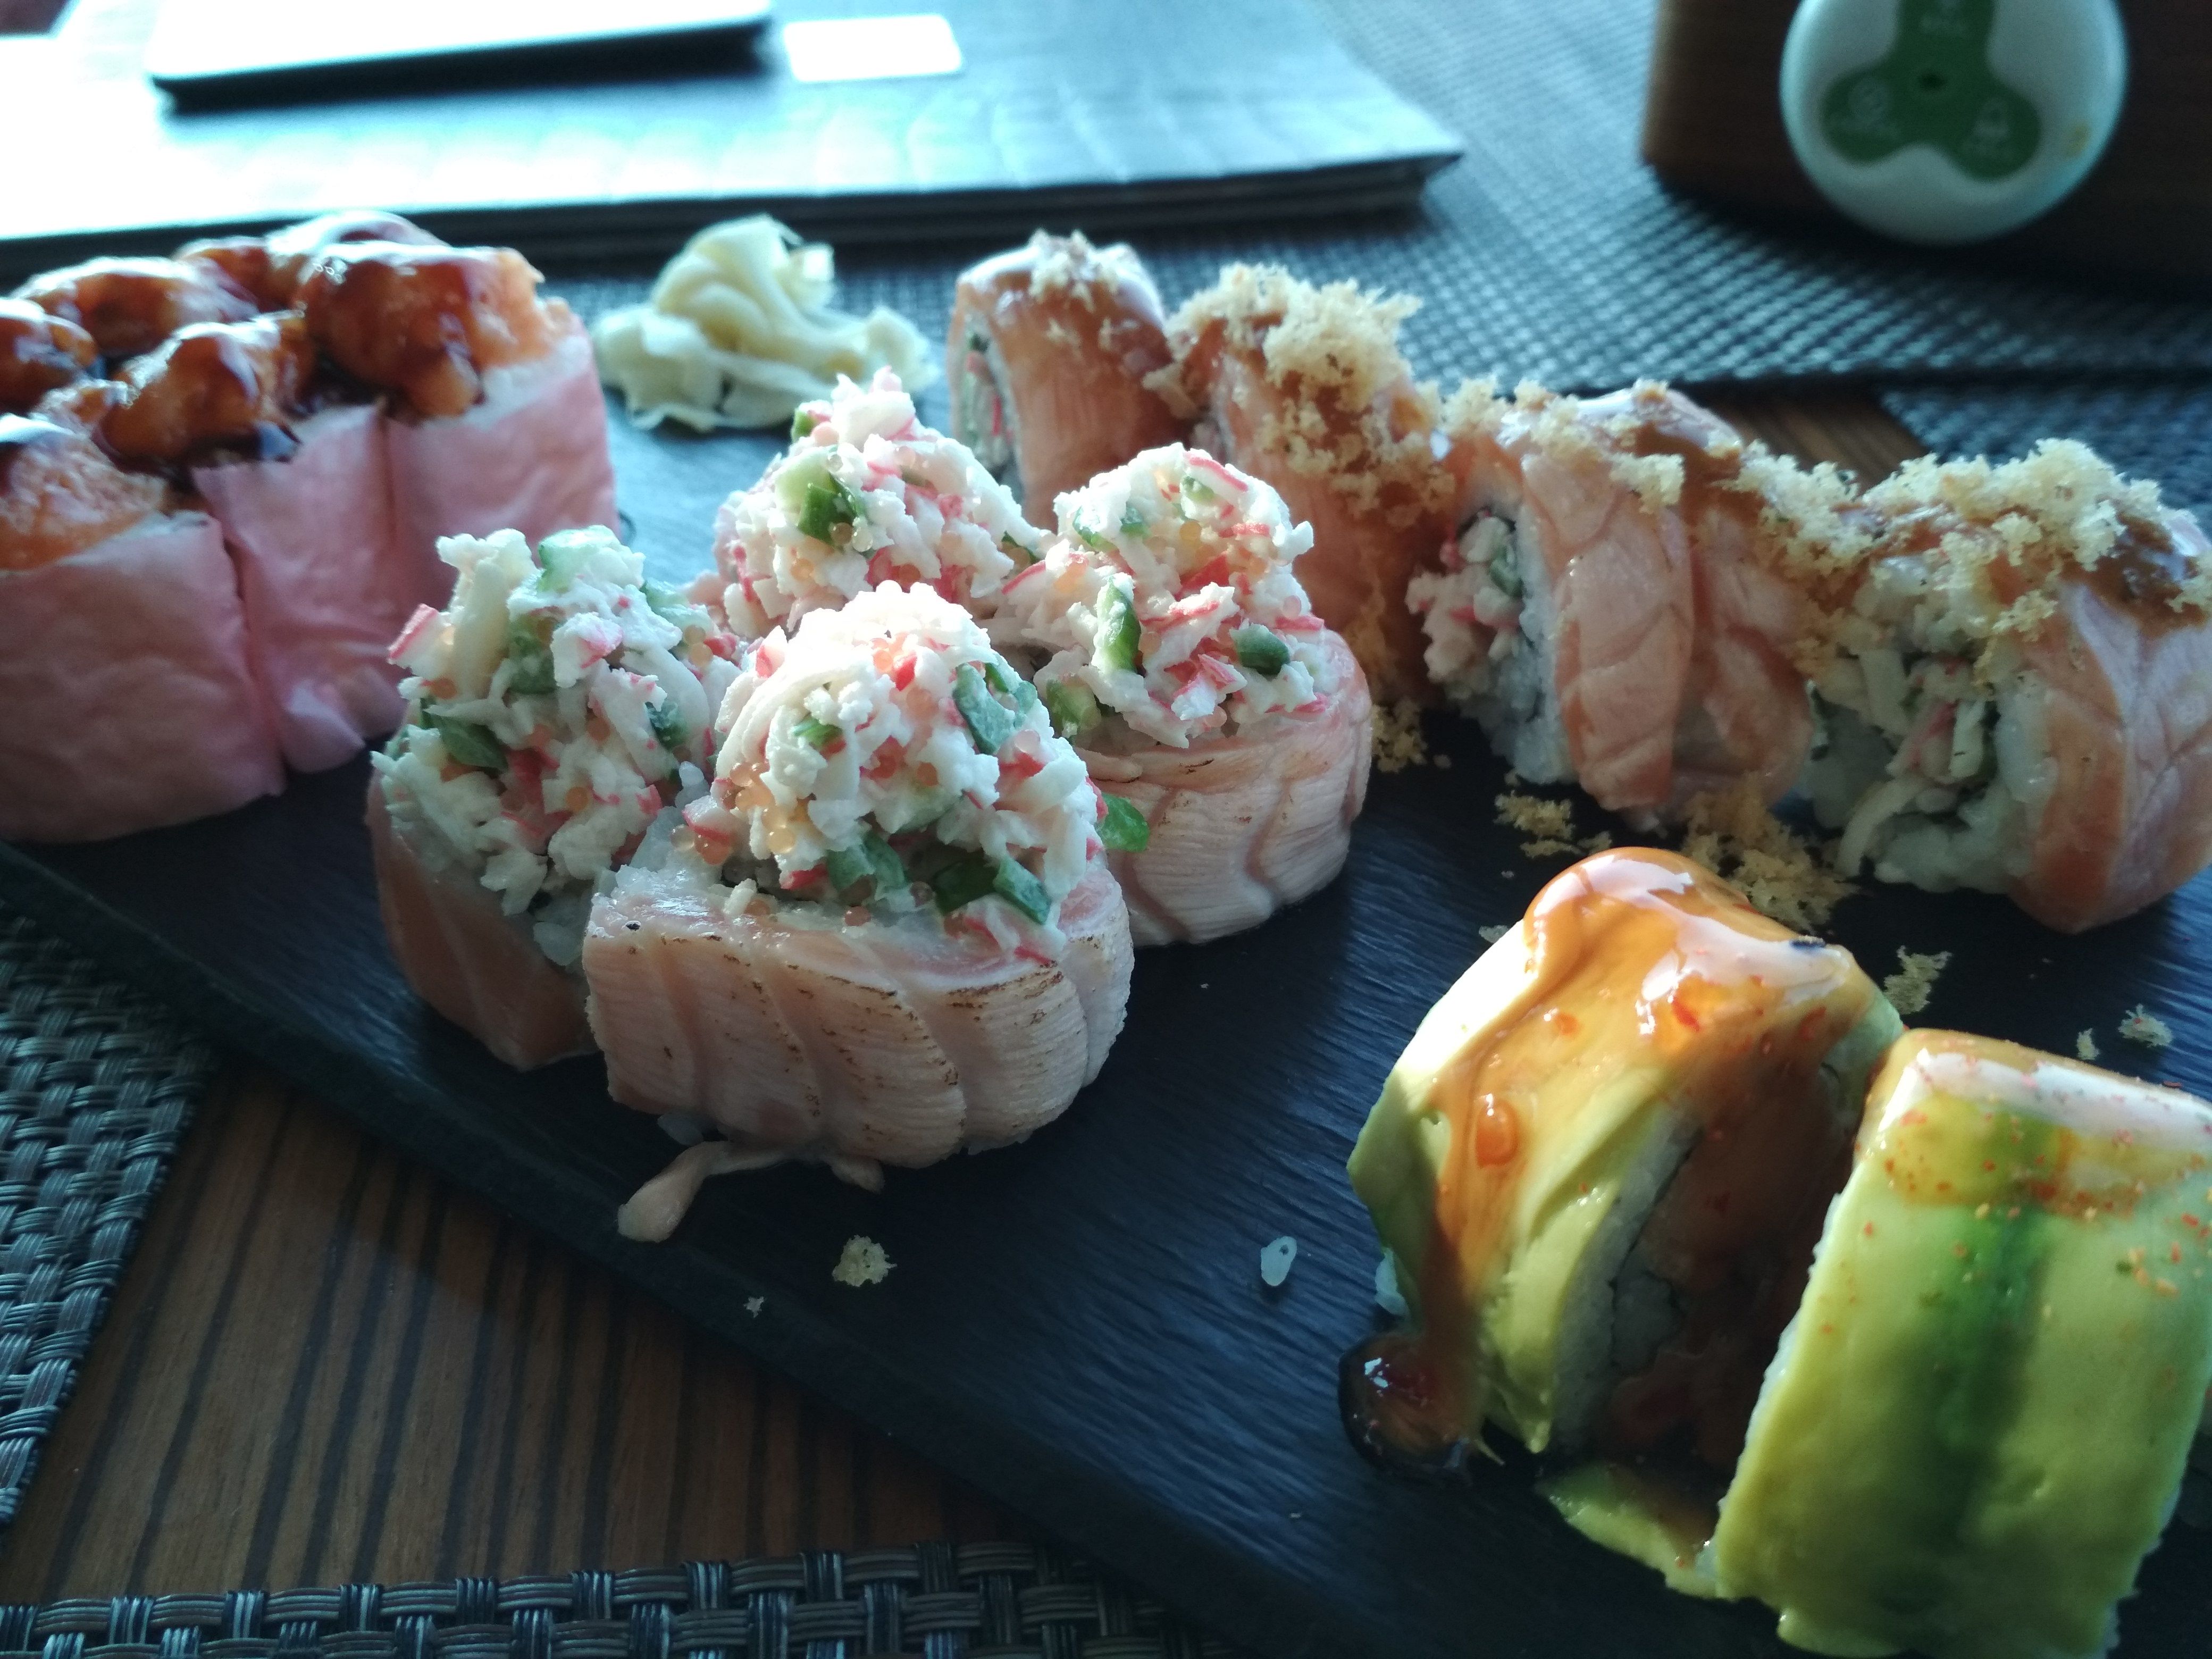 Caption: A close-up photo of a plate with various sushi rolls with salmon, crab meat, avocado, breadcrumbs, and sauces at SASA, Bulgaria. (Local Guide @DeniGu)